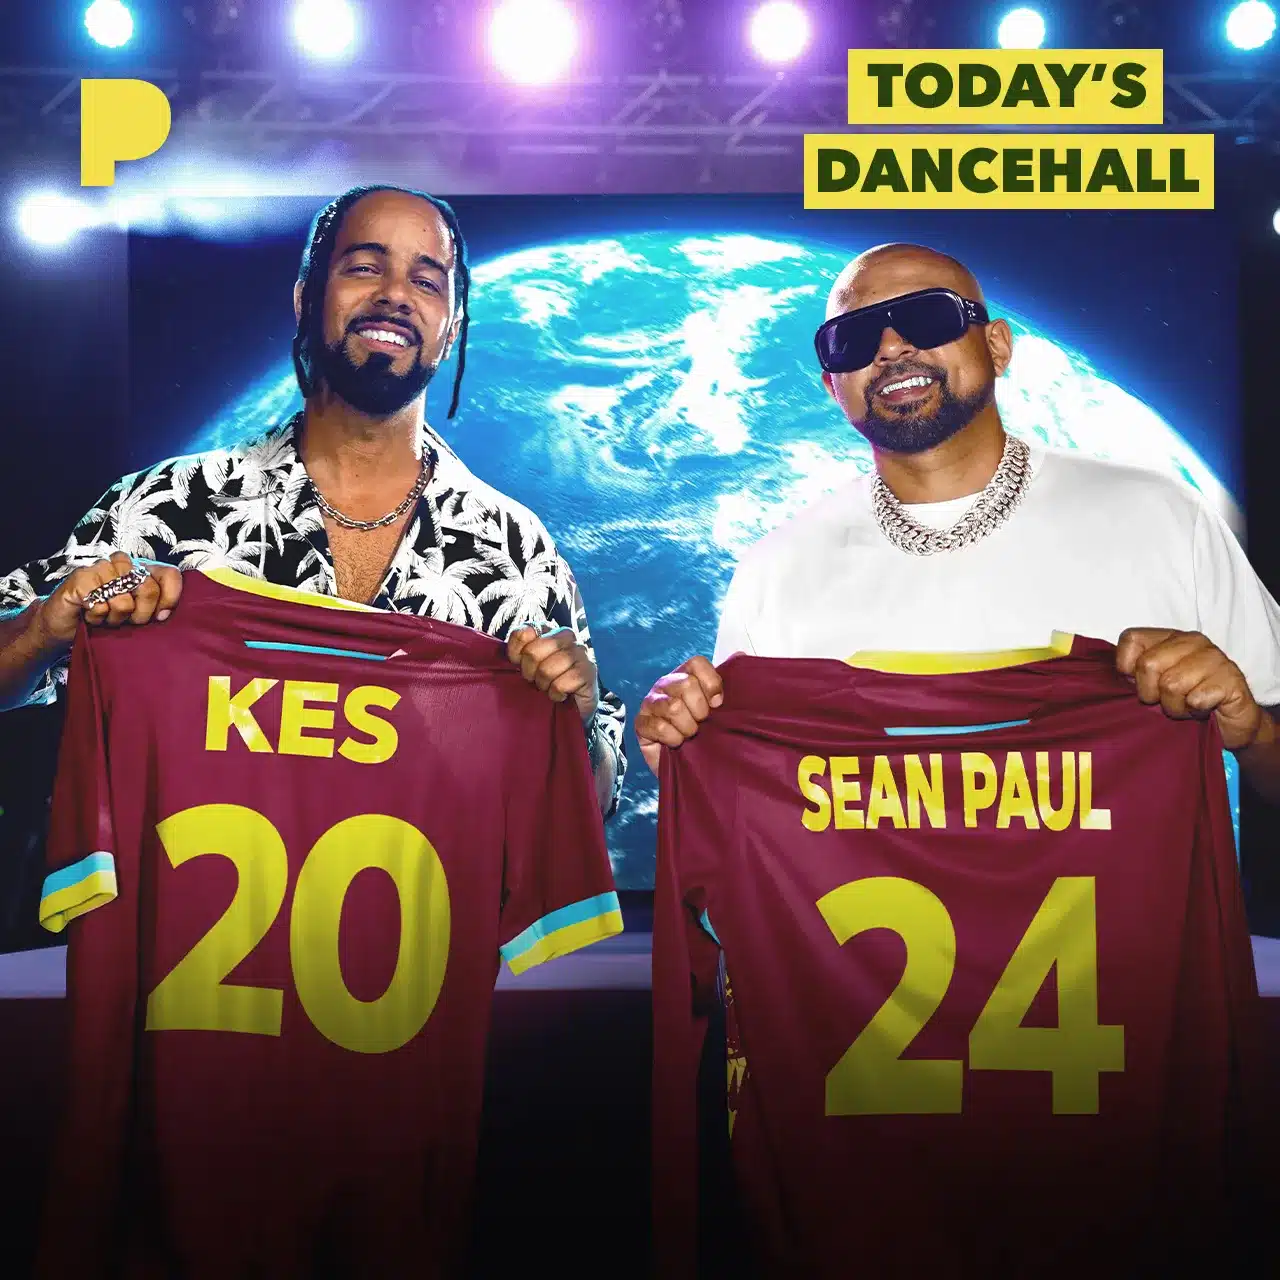 Two men stand smiling, each holding personalized maroon sports jerseys with yellow lettering. The backdrop features a glowing Earth image. Text reads "Today's Dancehall" in the top right corner, highlighting a special tribute to Grace Gaustad Case Study.